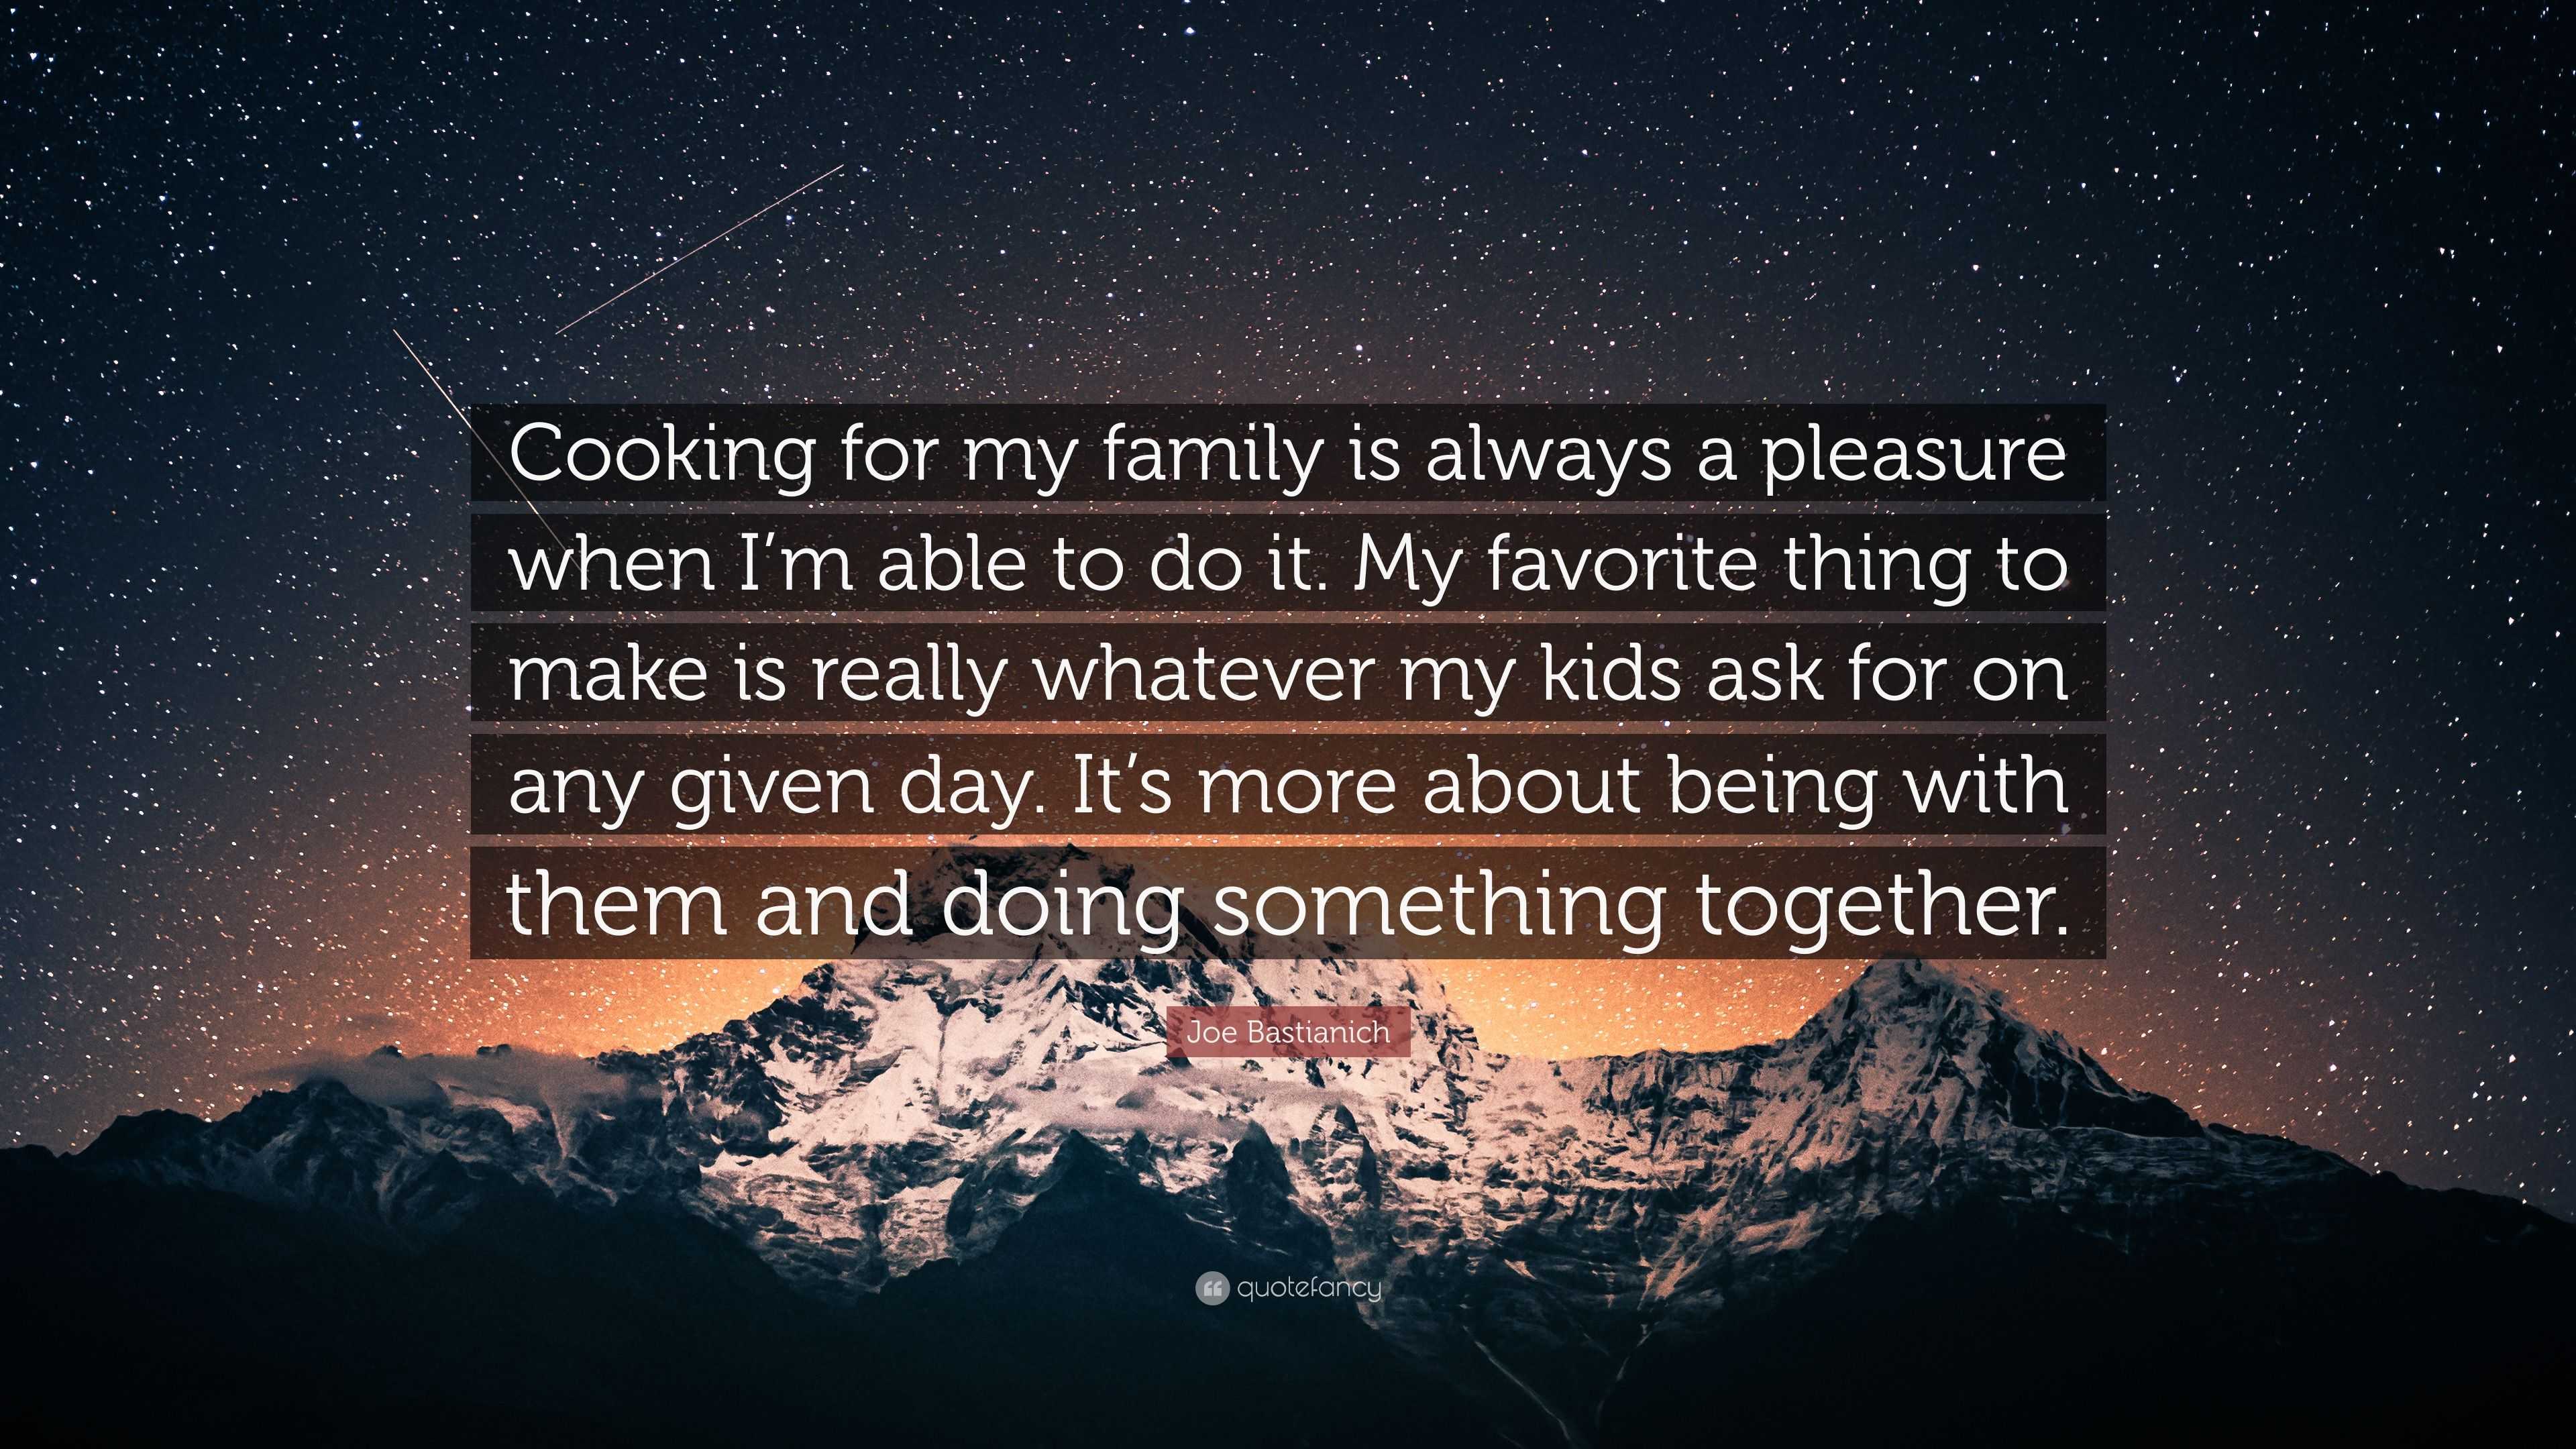 I'm always going to be doing it, it's part of my family